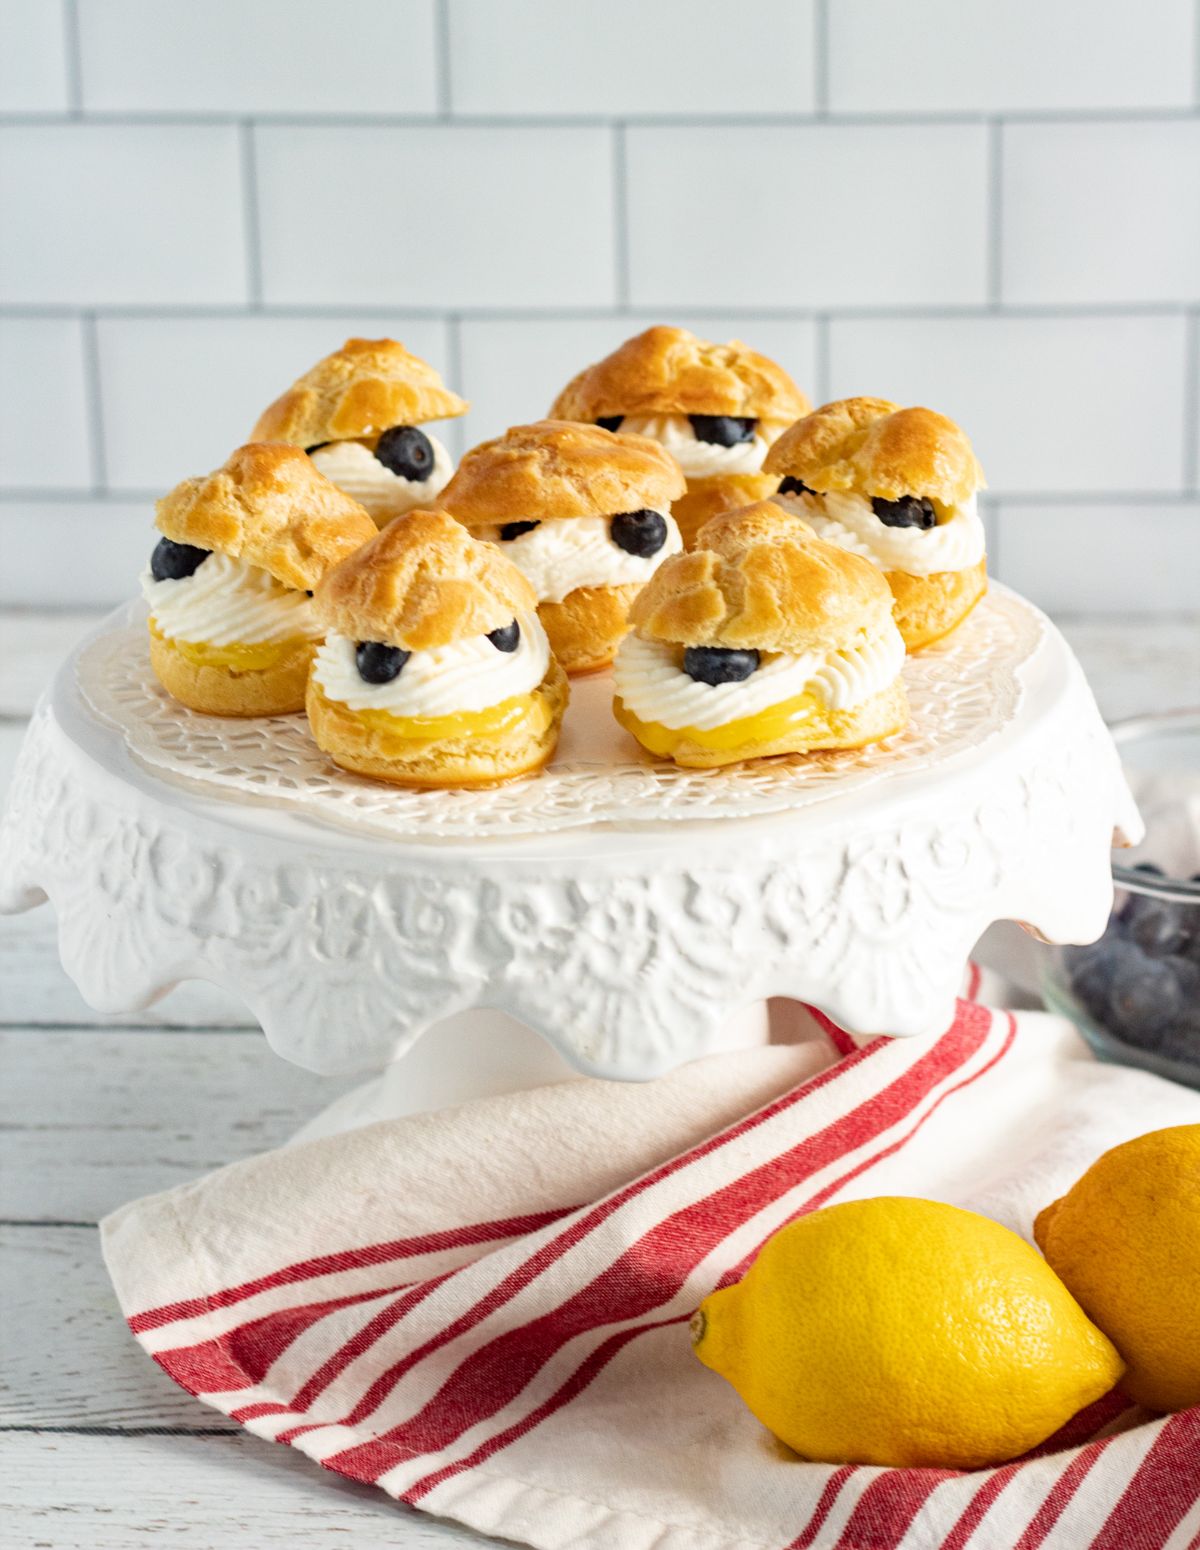 Lemon Cream Puffs With Fresh Blueberries on the cake stand next to a white and red striped cloth and two lemons